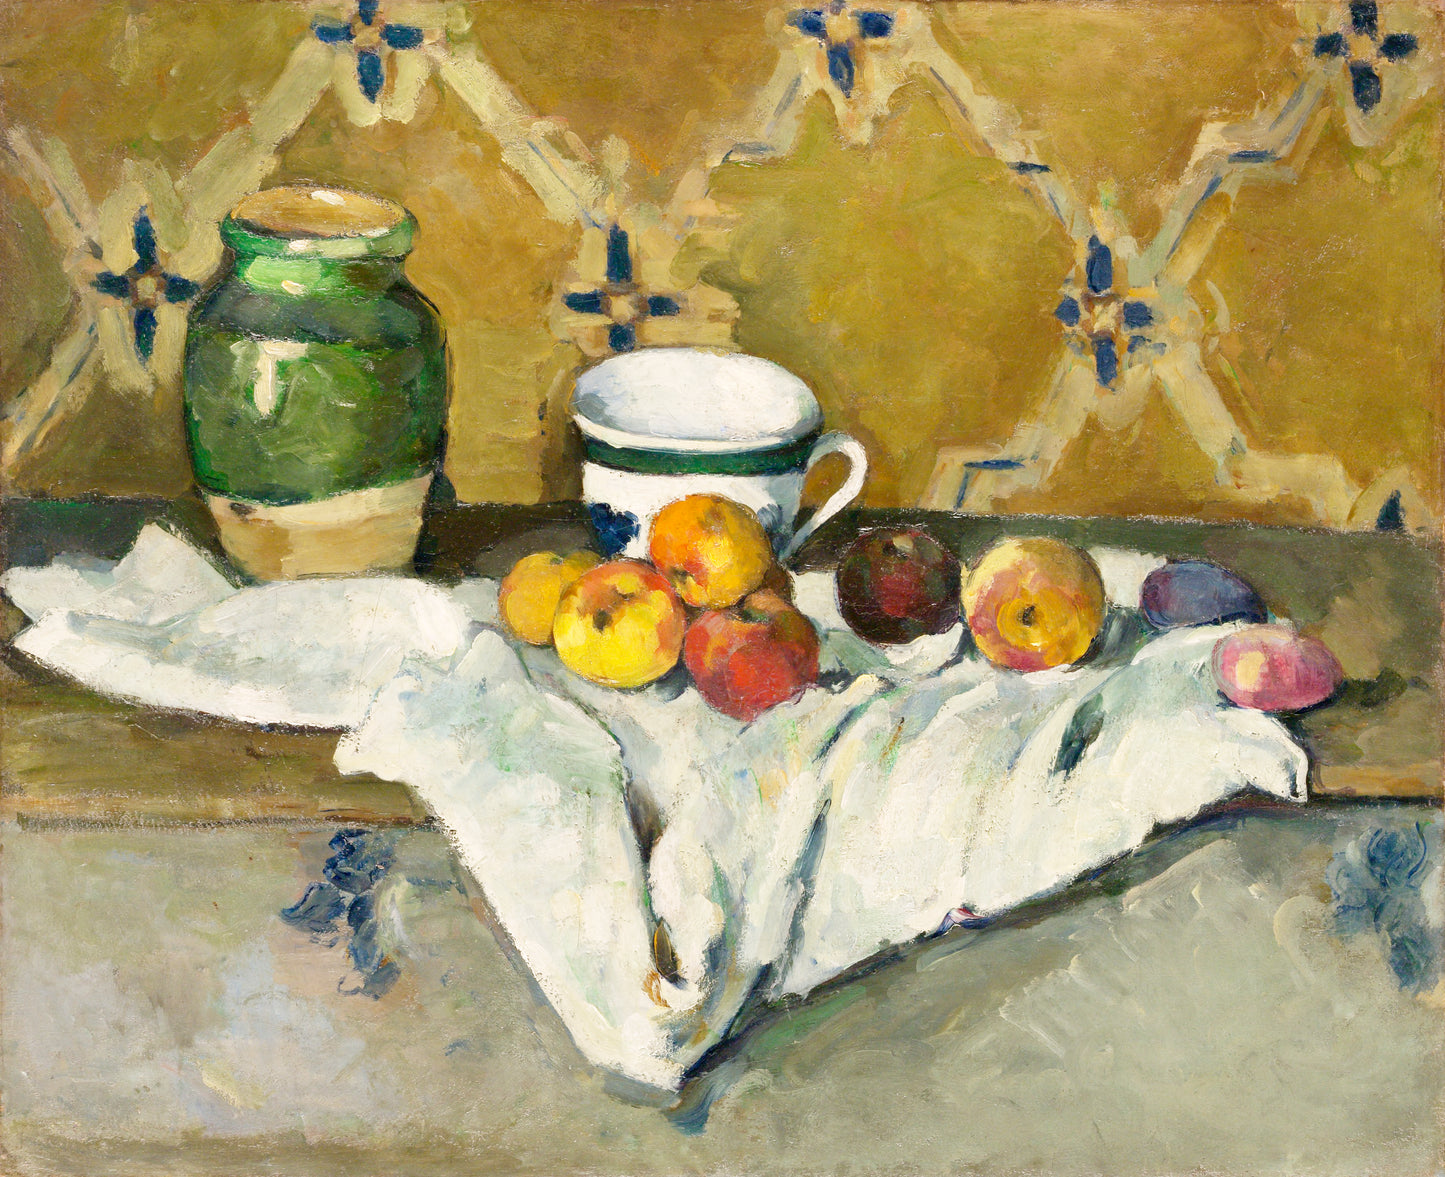 Paul Cezanne - Still Life with Jar Cup and Apples 1877